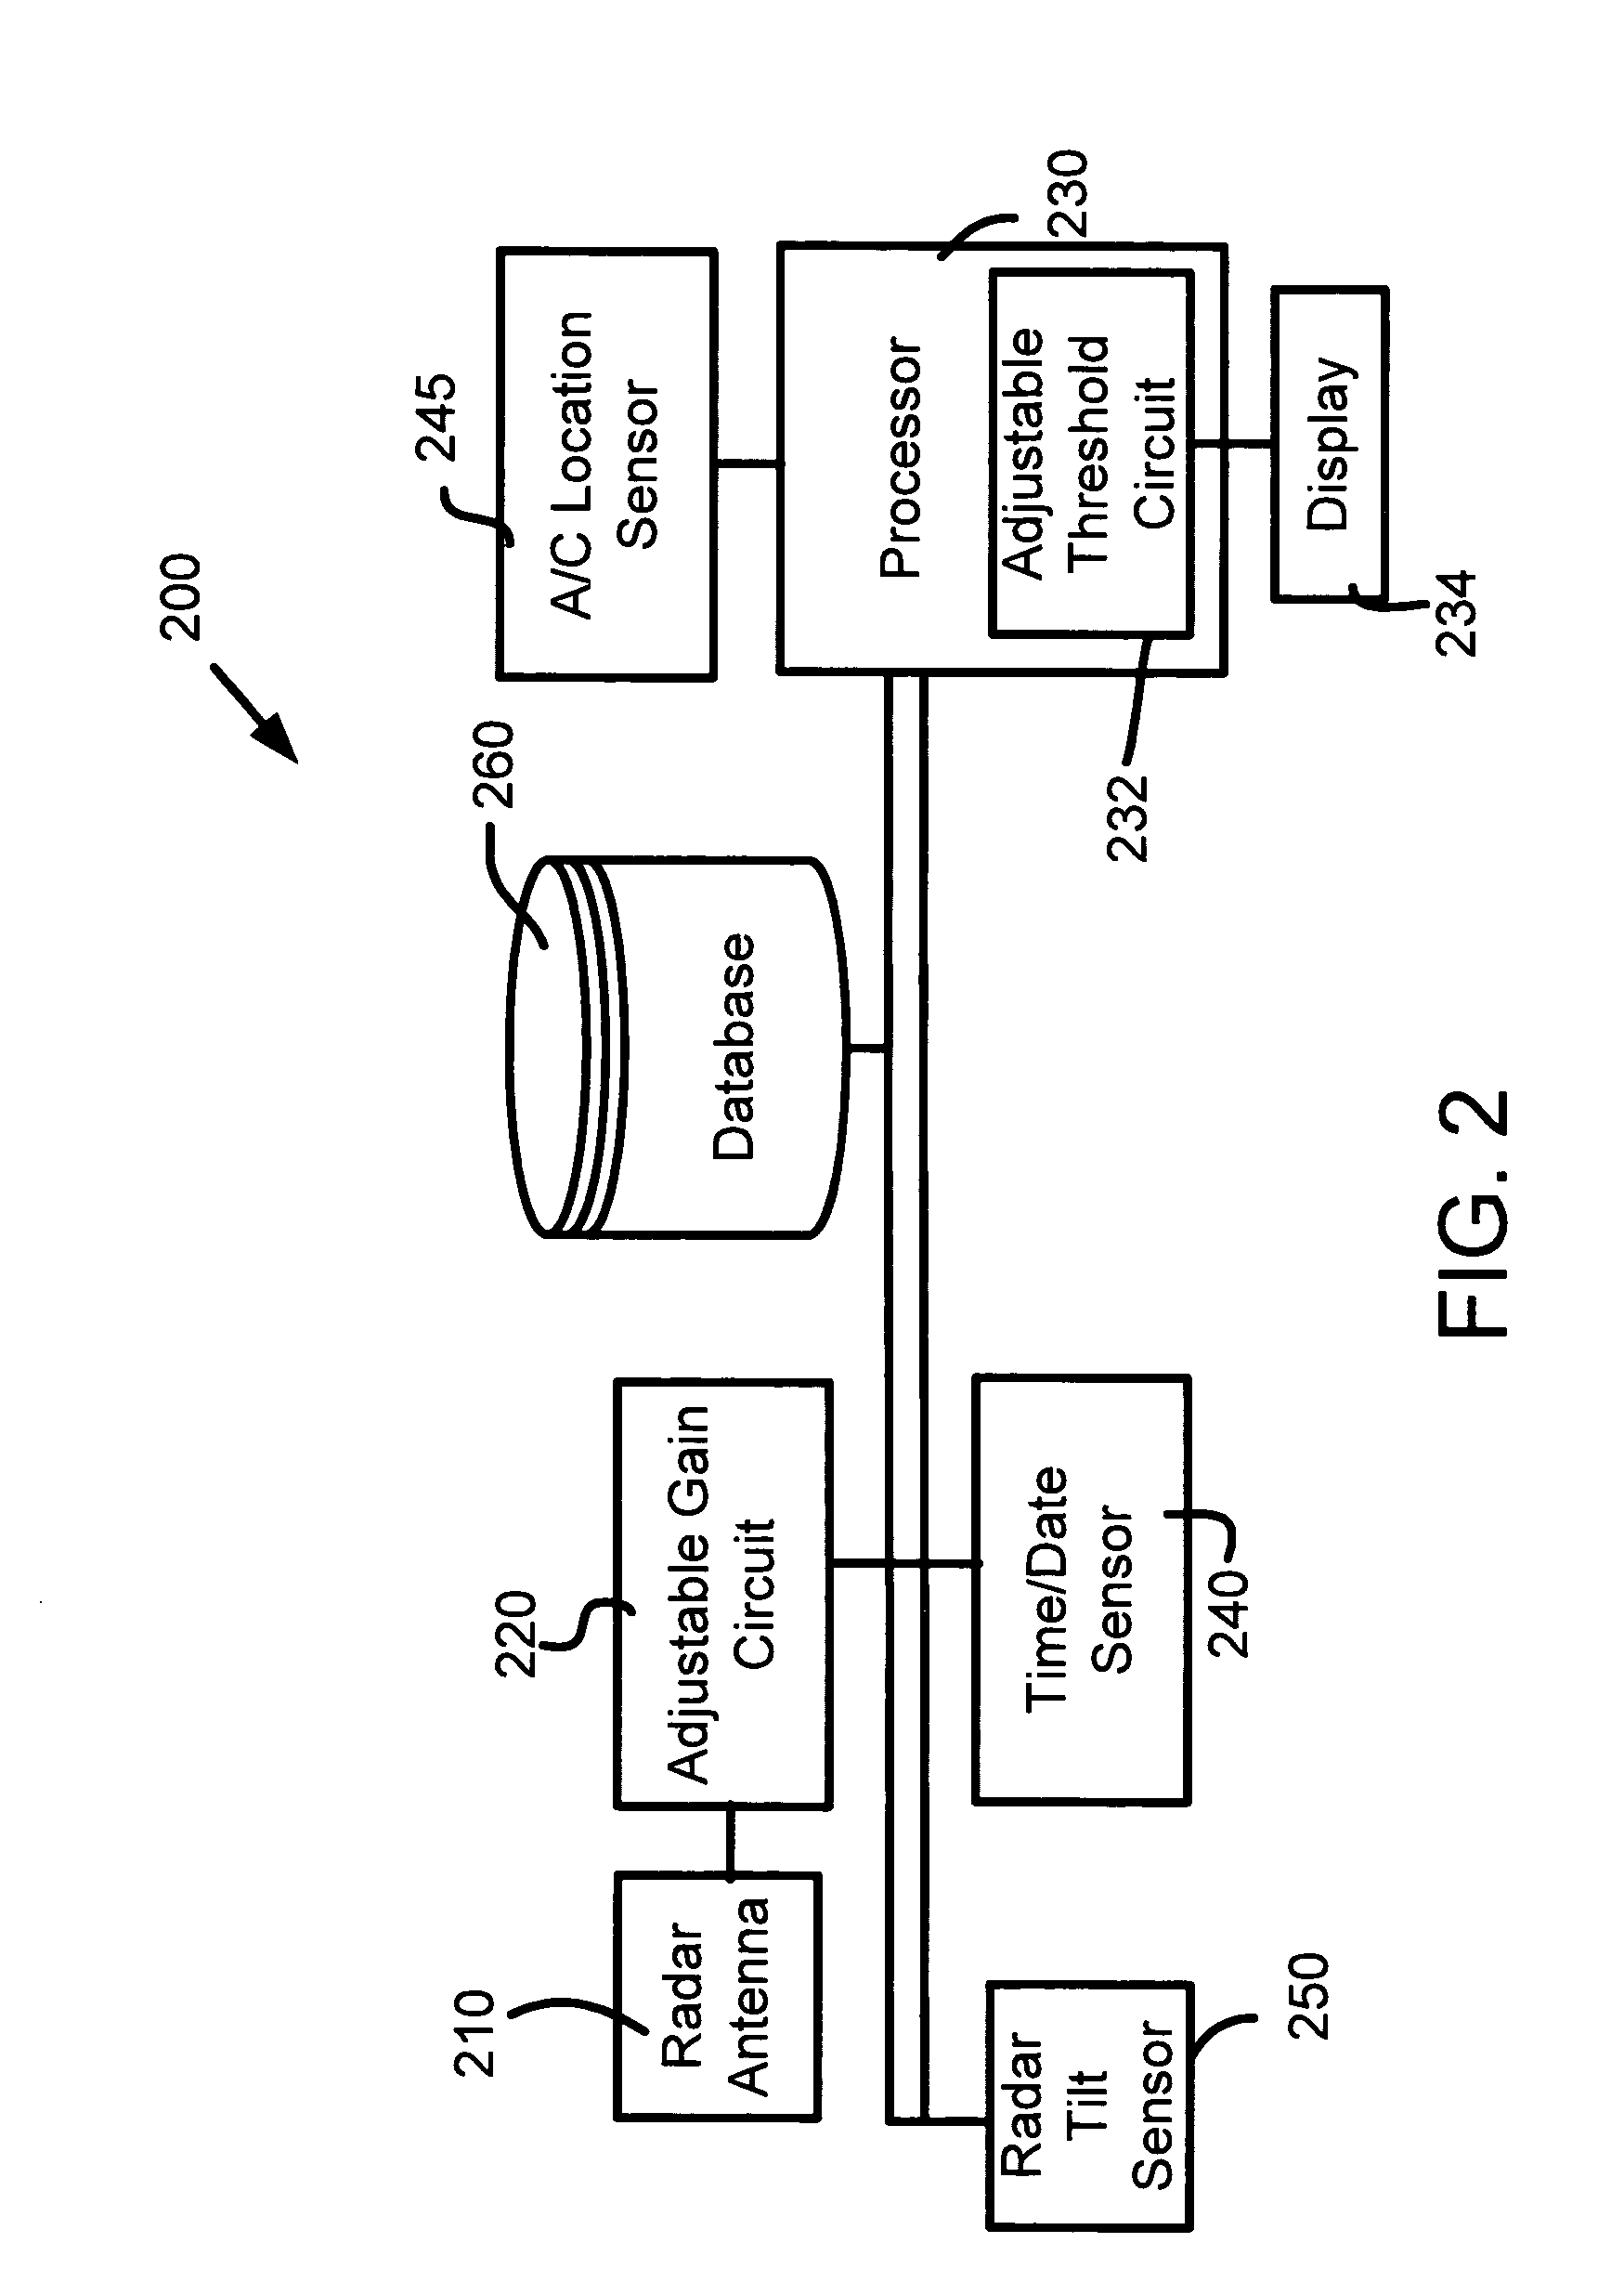 Predictive and adaptive weather radar detection system and method